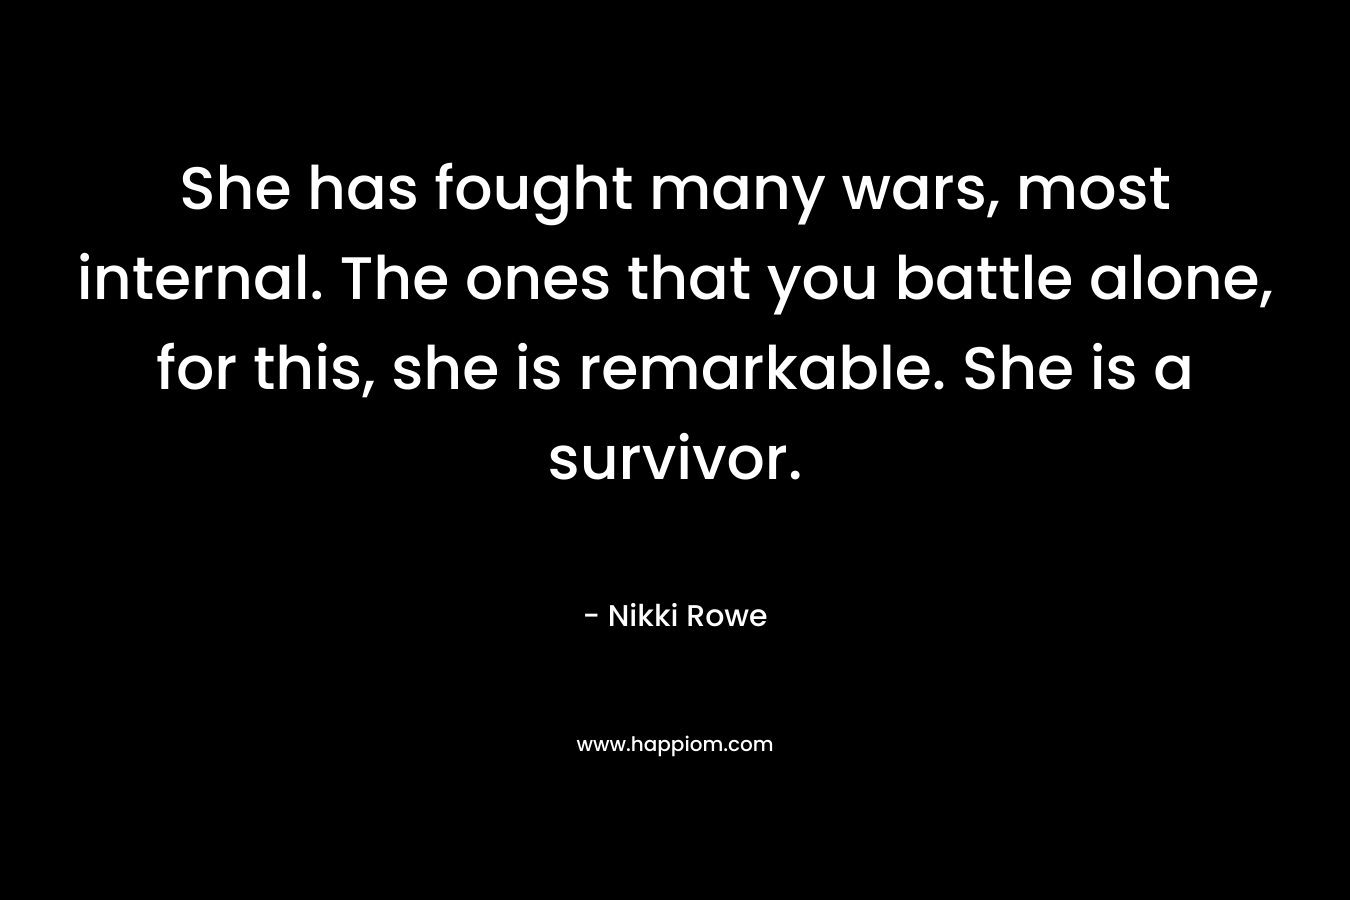 She has fought many wars, most internal. The ones that you battle alone, for this, she is remarkable. She is a survivor.